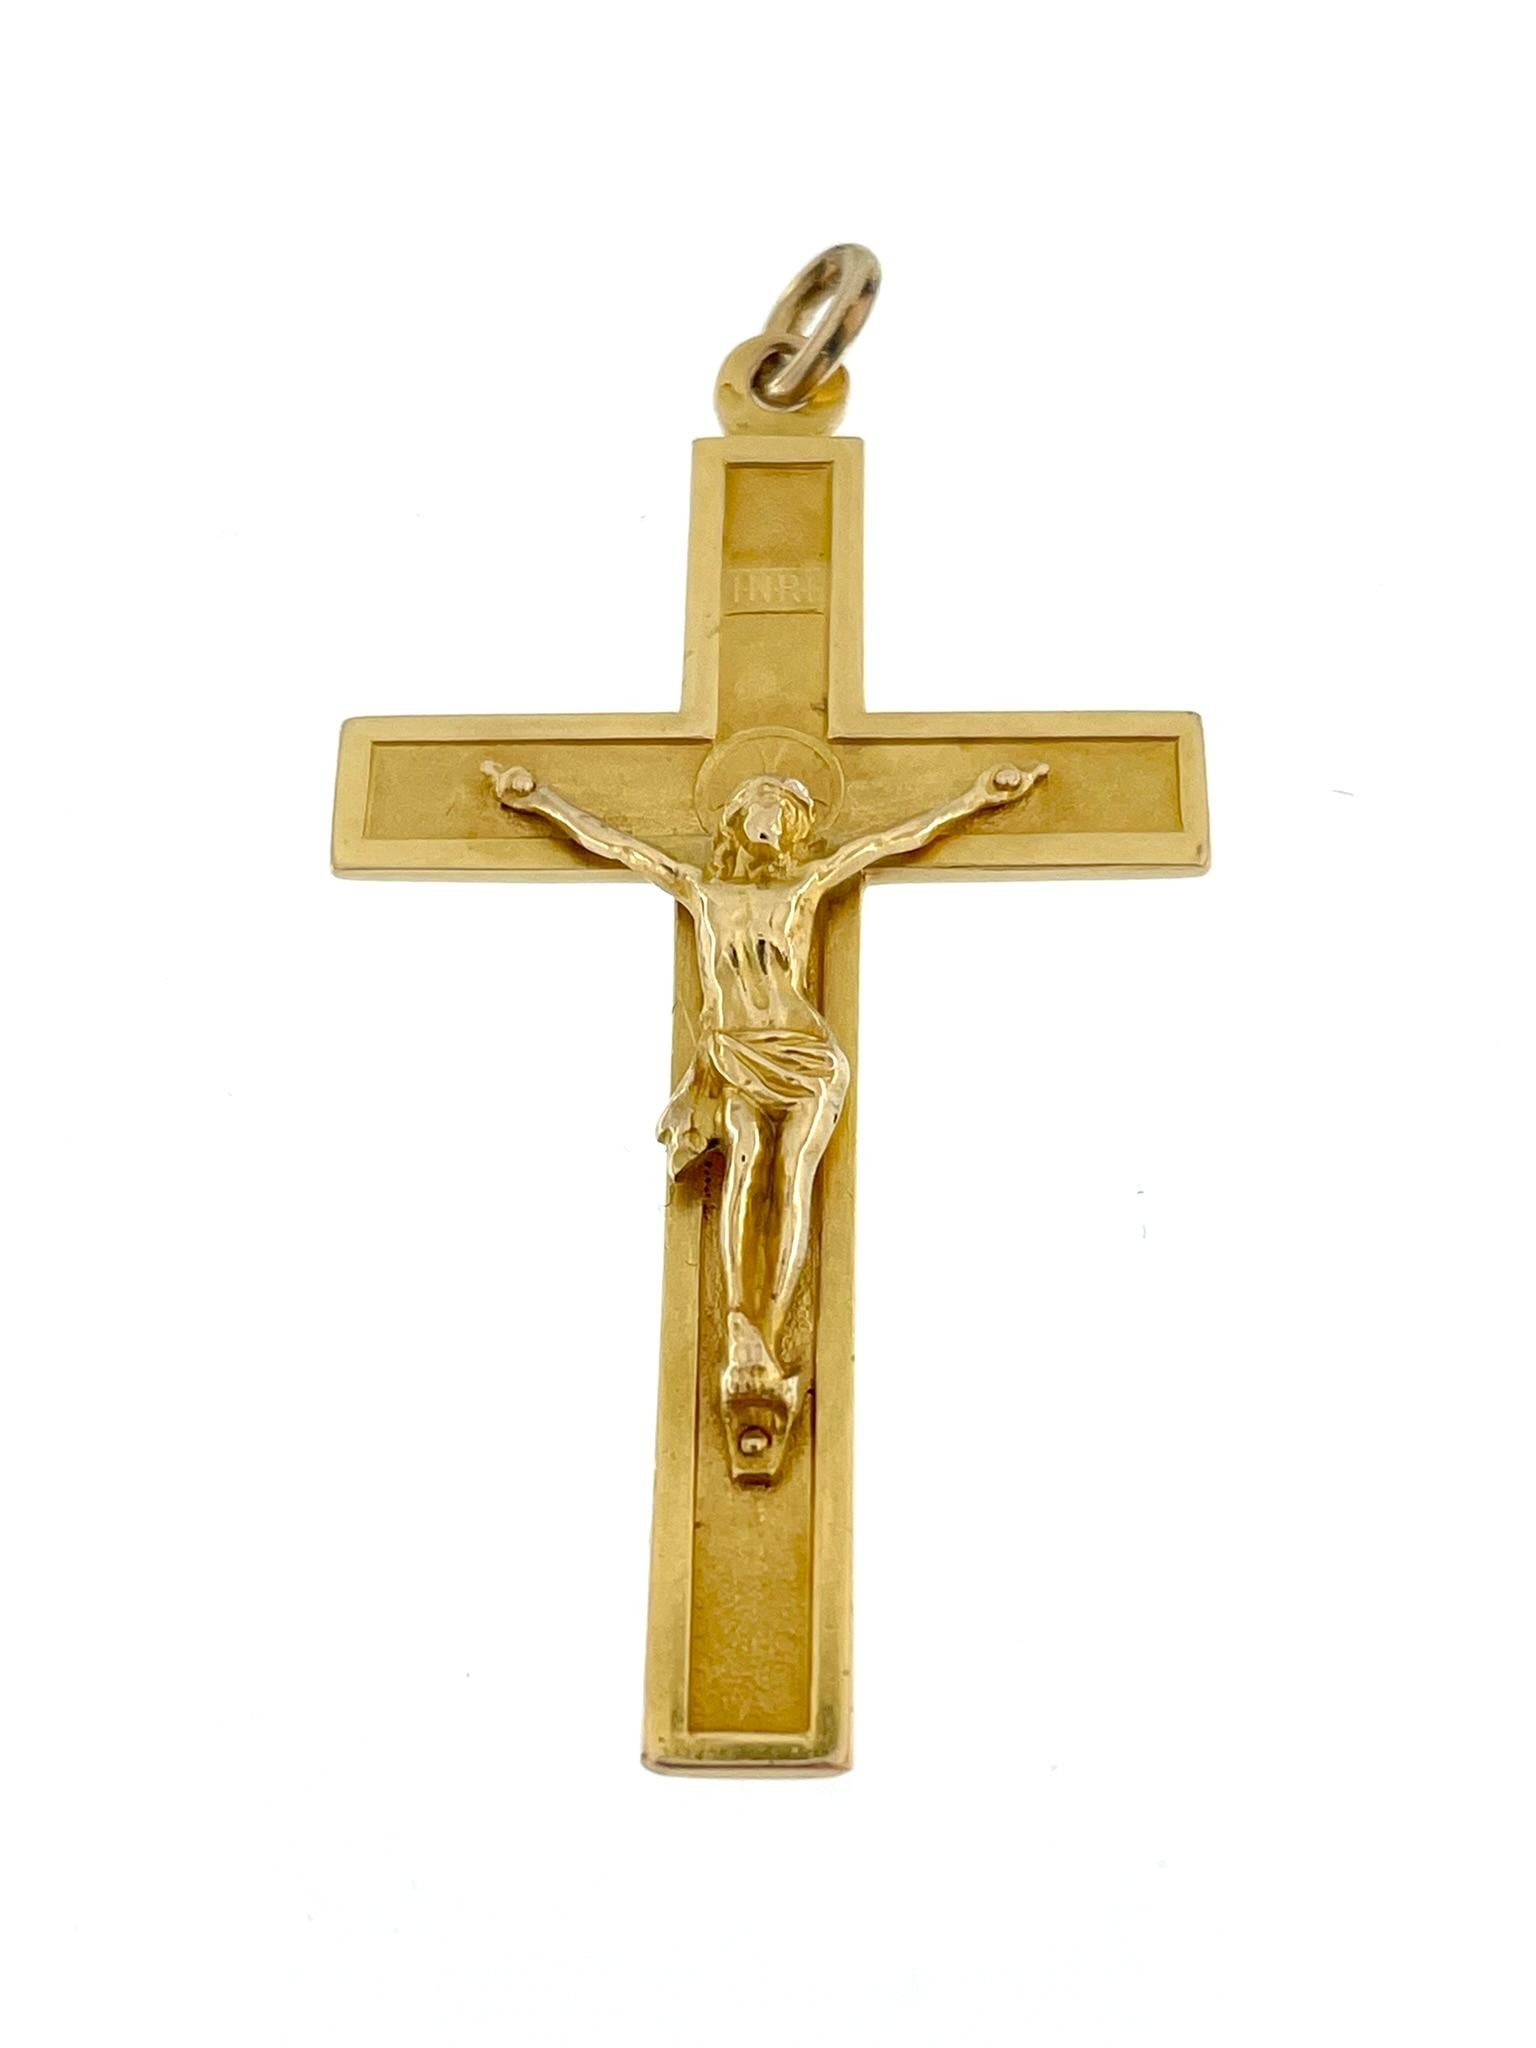 The Vintage 18-karat Yellow Gold French Crucifix is a timeless and elegant piece of religious jewelry with a touch of French craftsmanship. 

Crafted from 18-karat yellow gold, this crucifix embodies a classic and enduring beauty. The use of